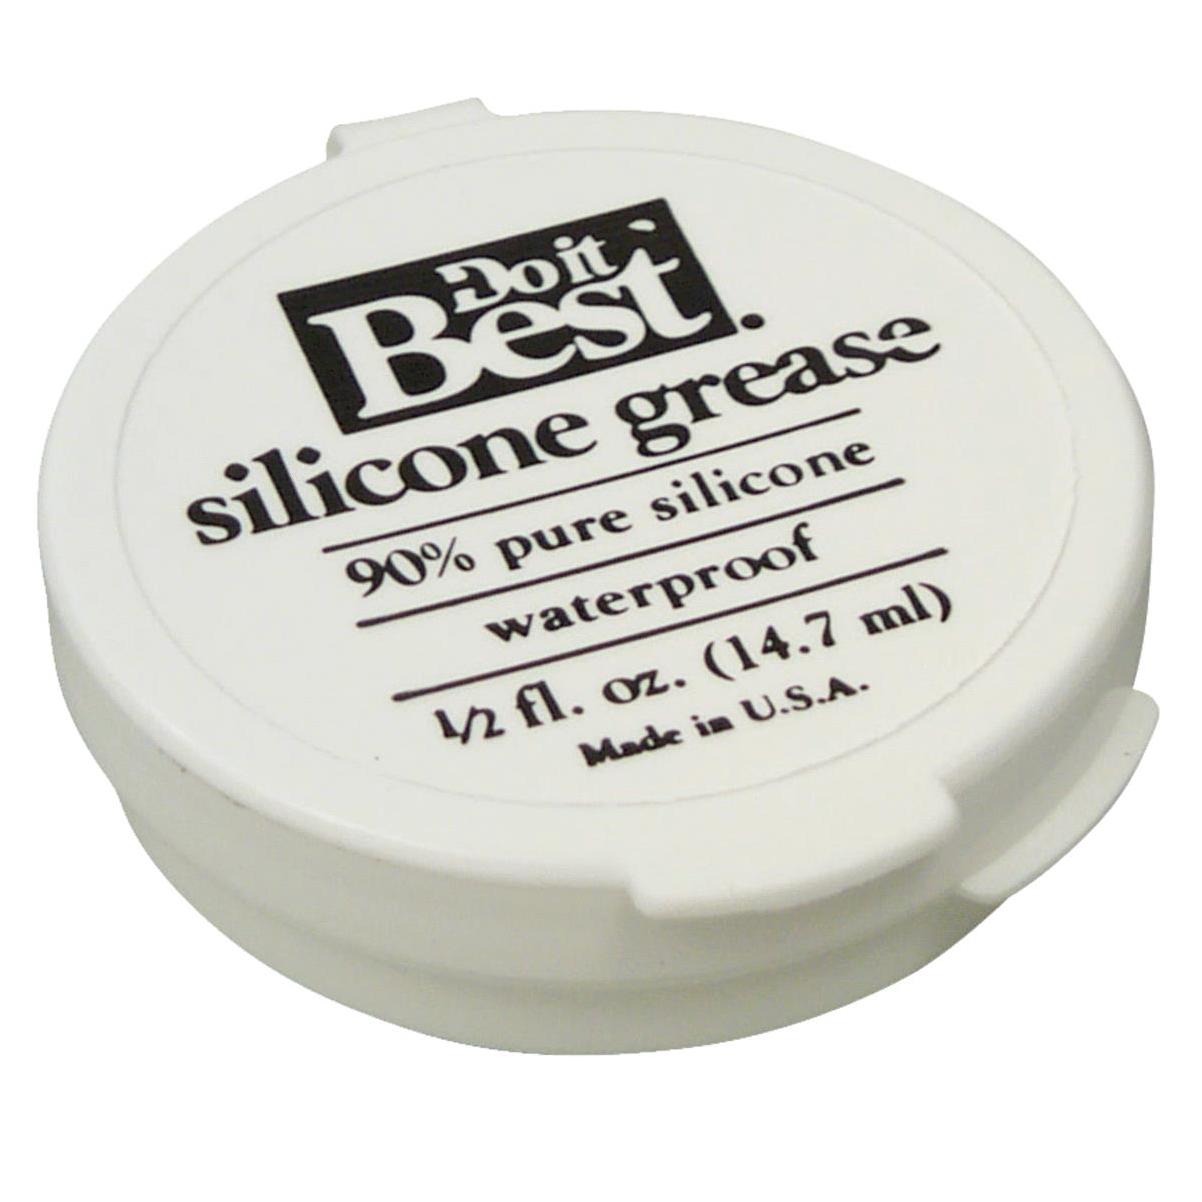 Silicone Grease 8oz Silicone Paste | Plumbers Grease | Made in USA -  Multi-Pu